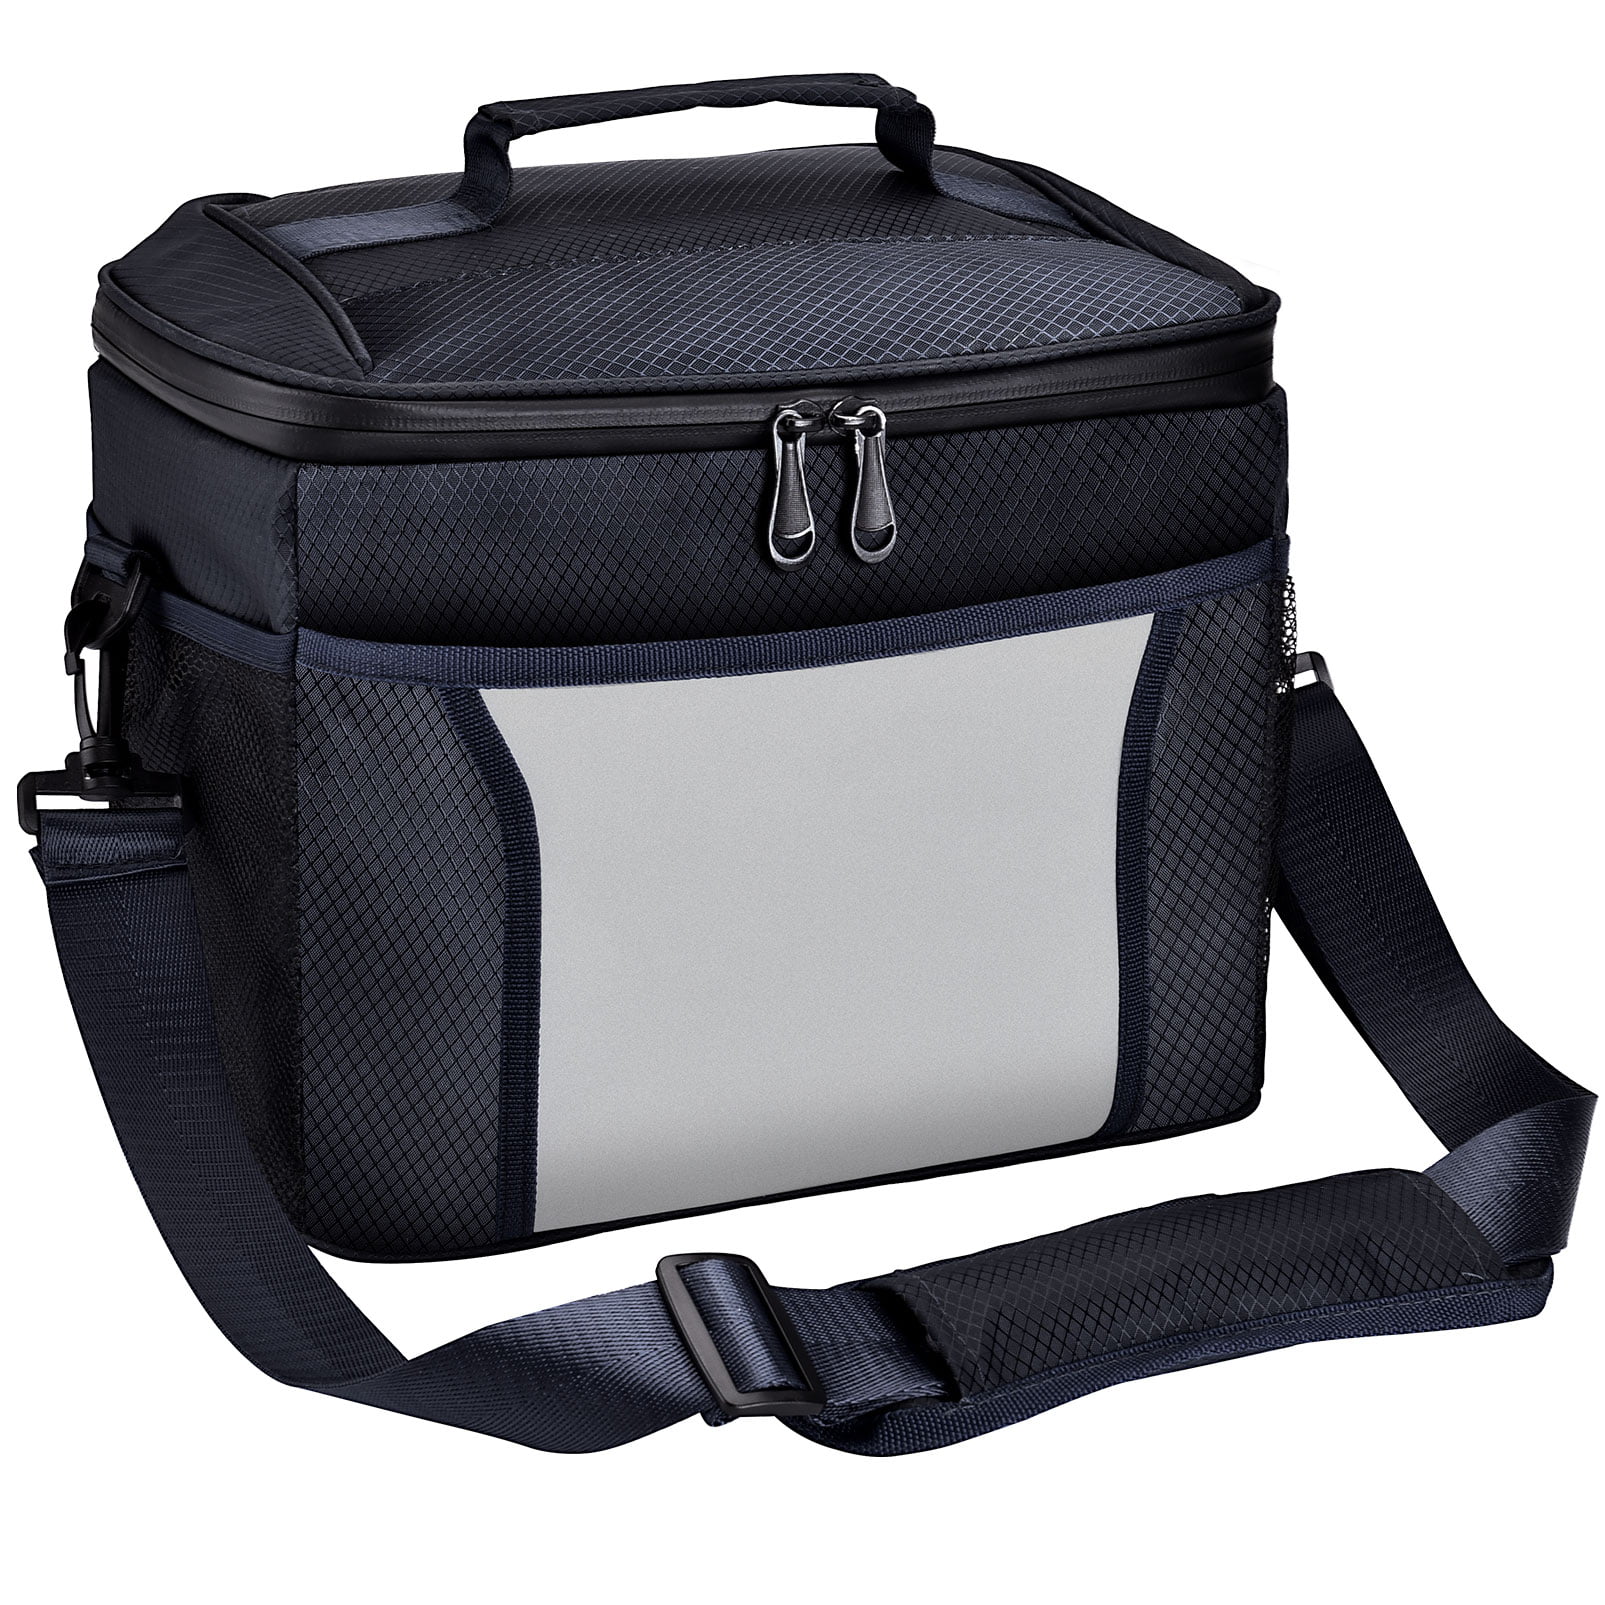 Details about   Large Insulated Lunch Bag For Men And Women With Room For More Meals And Snacks.